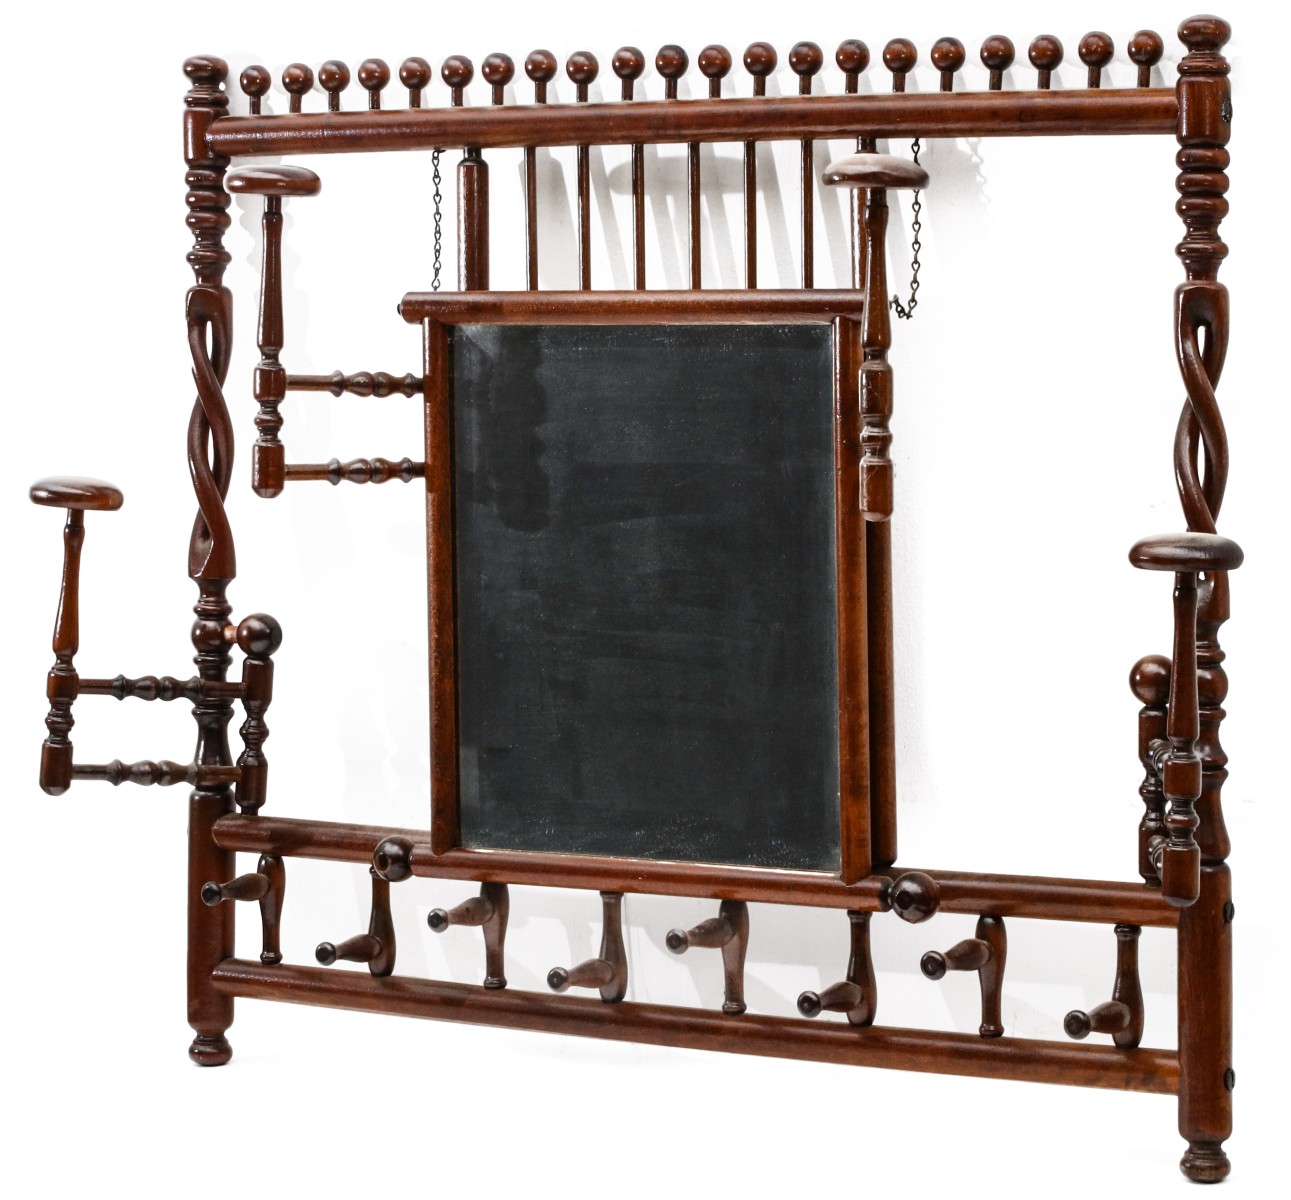 A CARVED, TURNED HALL RACK WITH STICK-AND-BALL DECOR